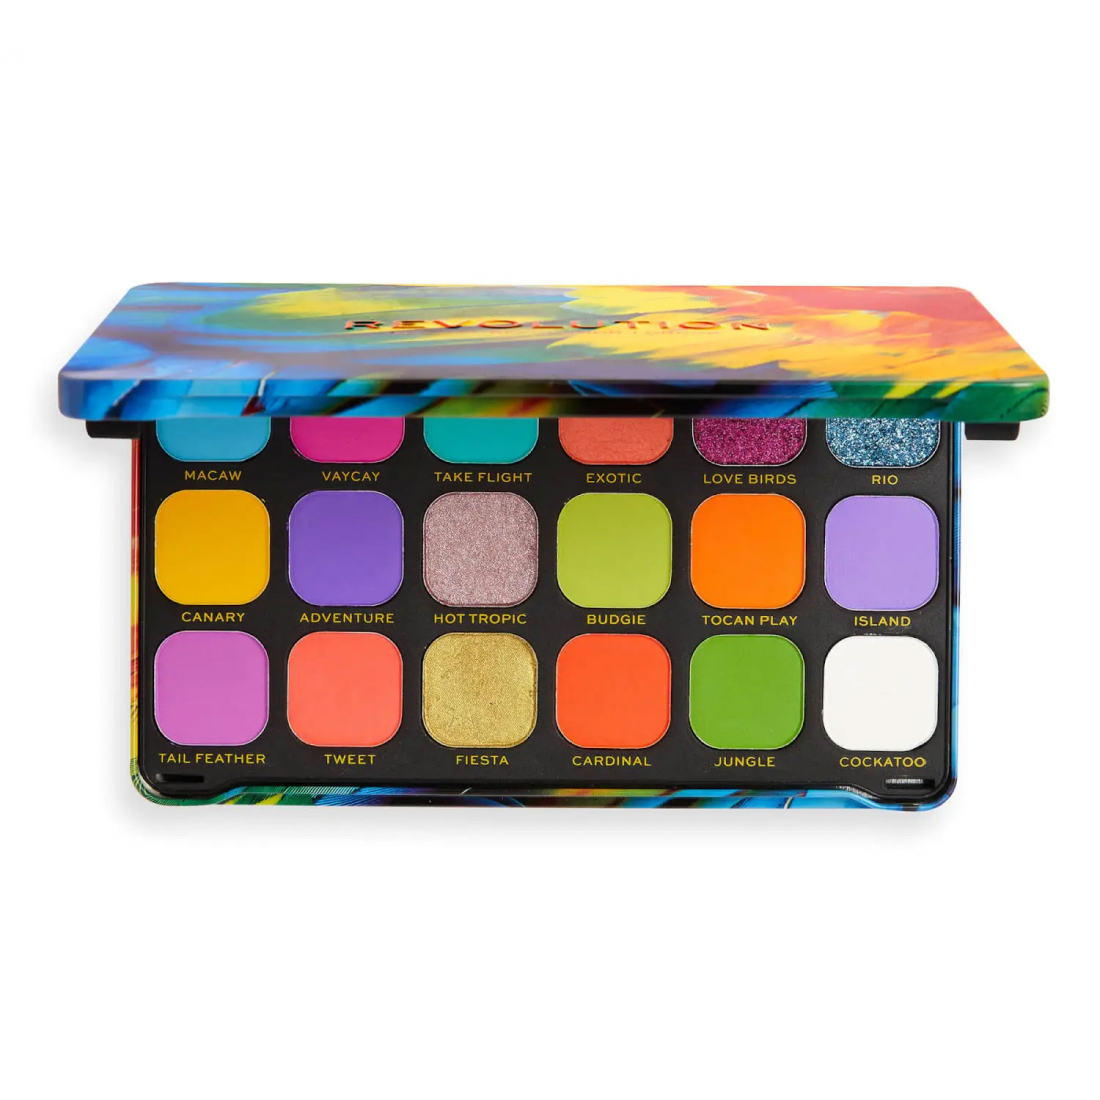 'Forever Flawless' Eyeshadow Palette - Birds Of Paradise 19.8 g